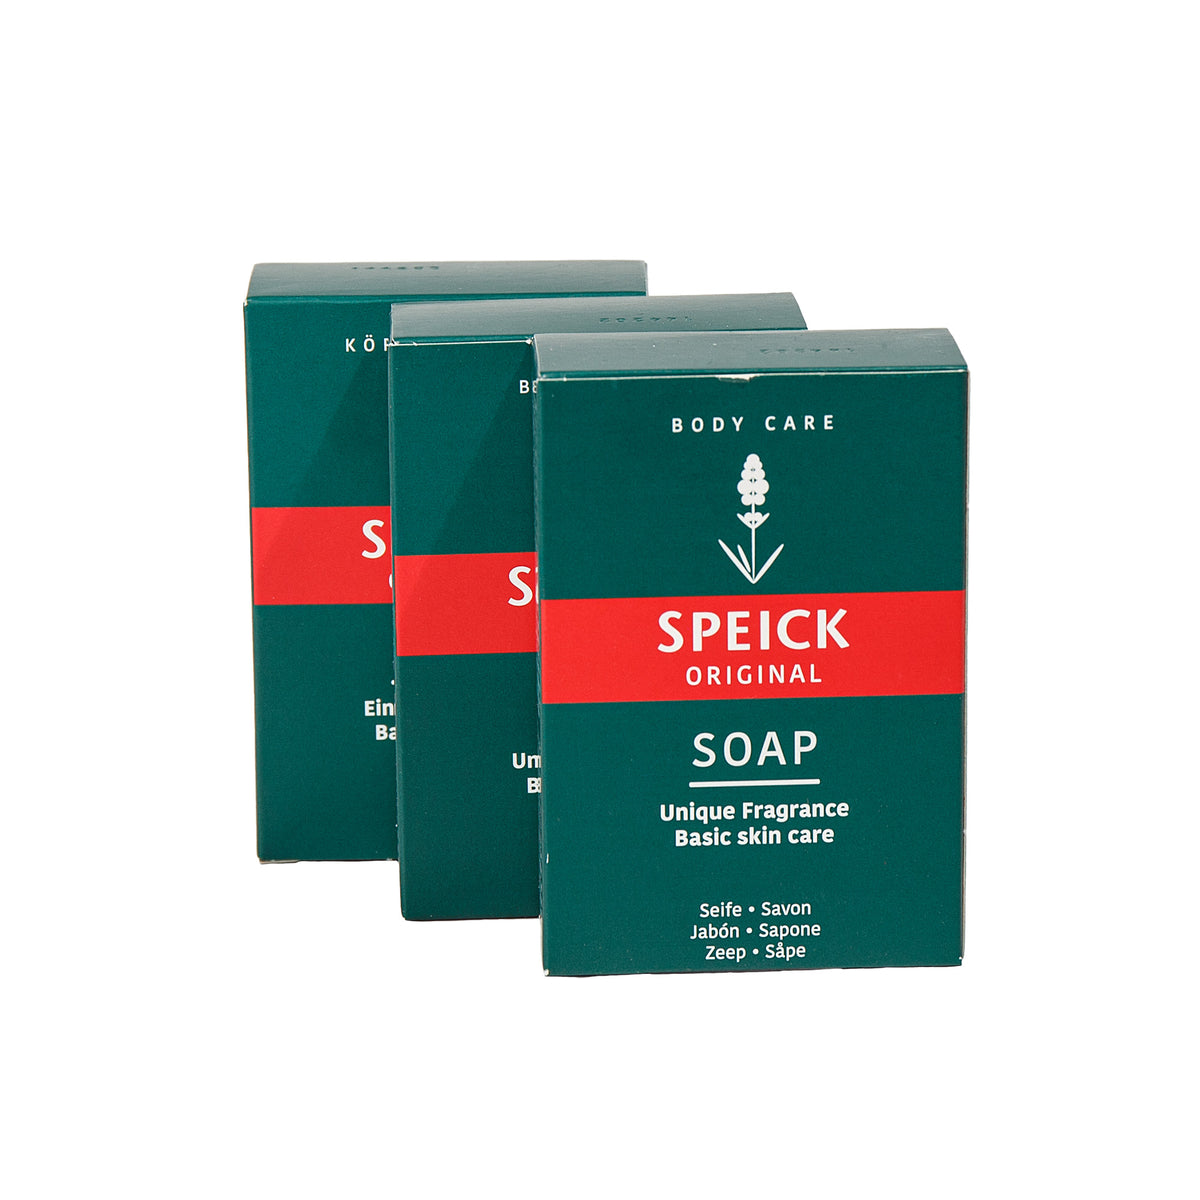 Primary image of Speick Soap Set of 3